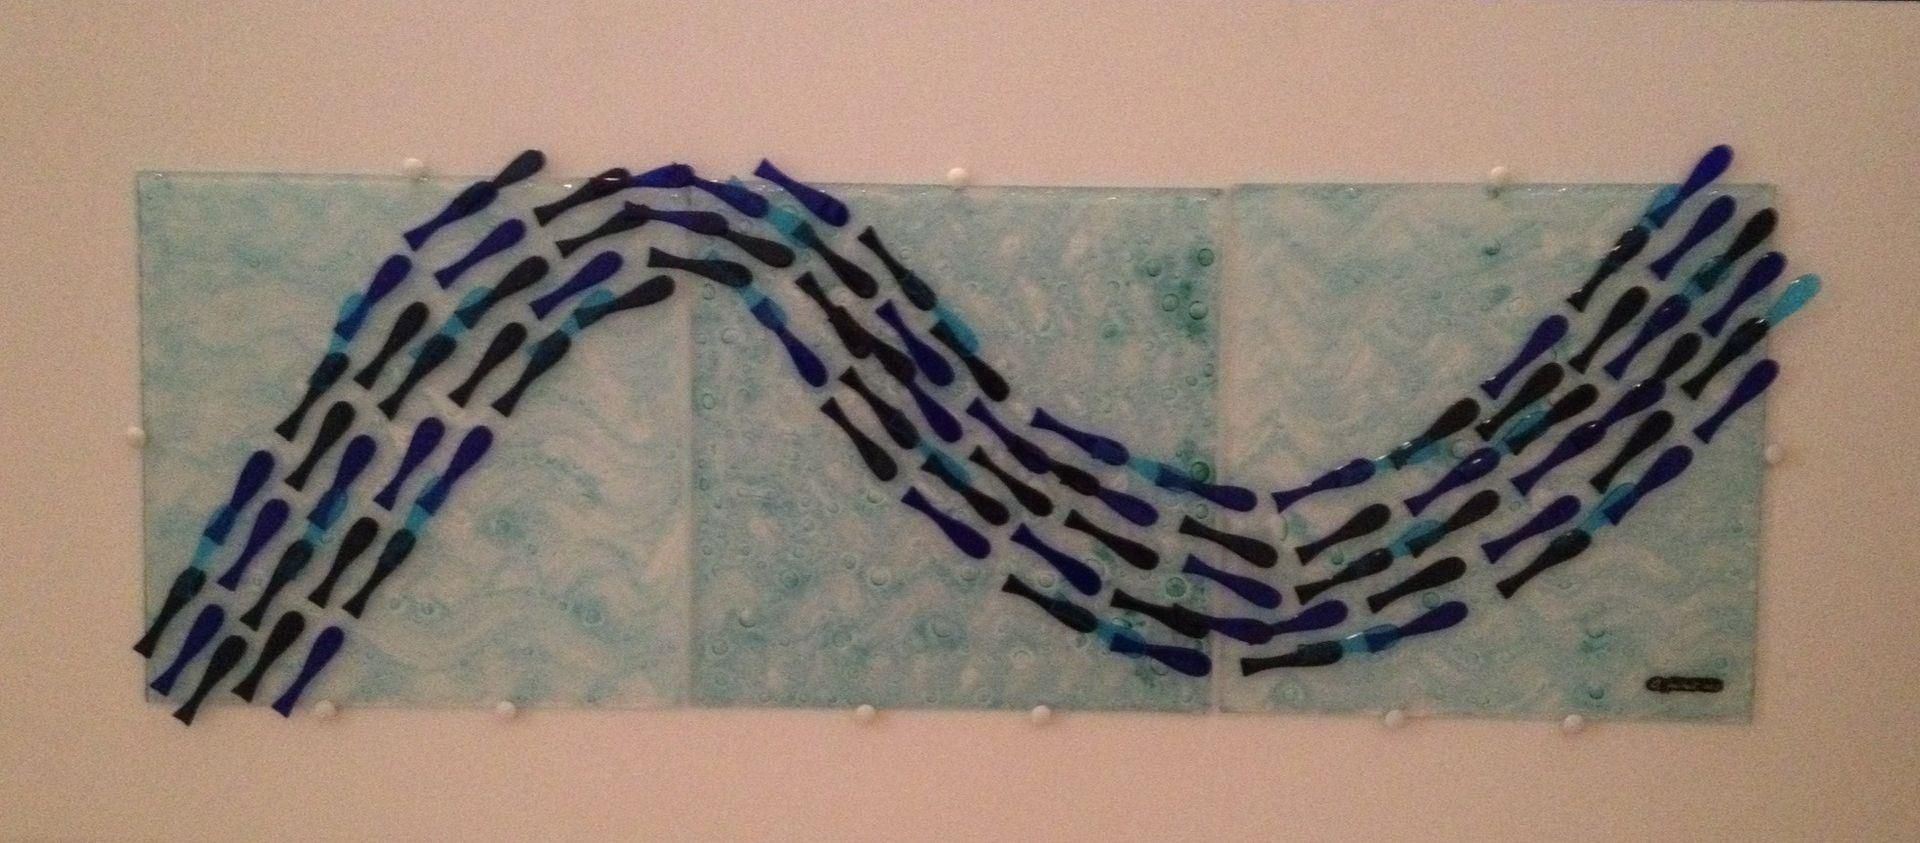 Hand Made Wall Decor Fused Glass Fish In The Sea (3 Tiles)aval Regarding Fused Glass Fish Wall Art (View 14 of 20)